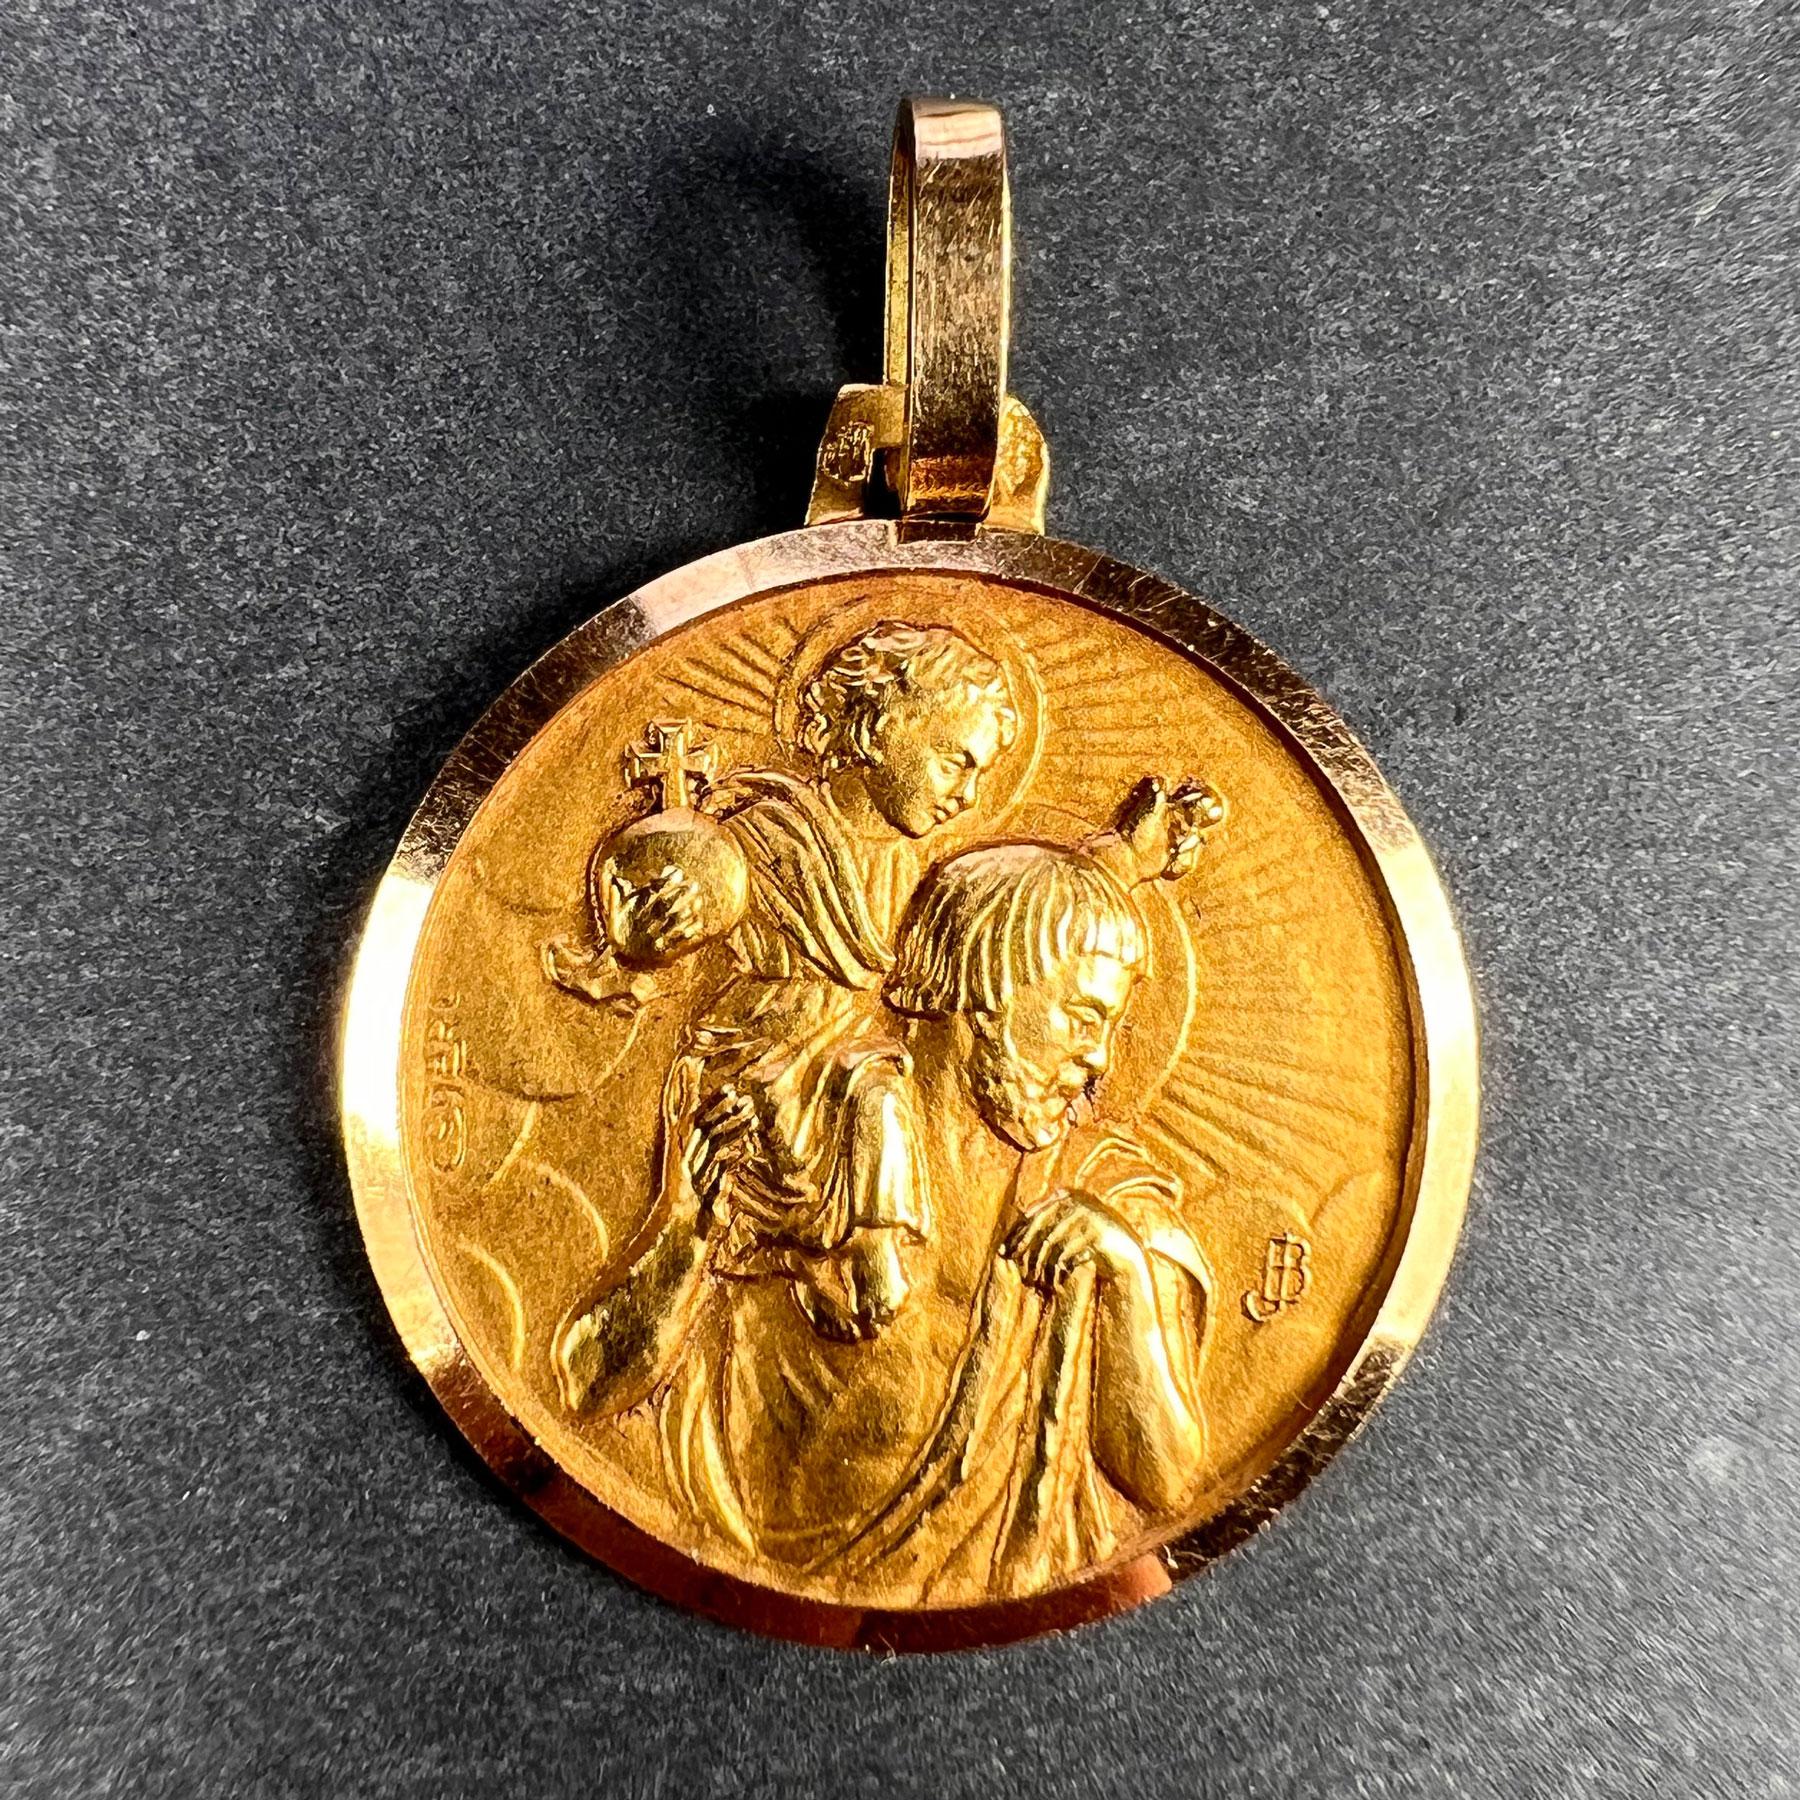 A French 18 karat (18K) yellow gold charm pendant designed as a medal depicting Saint Christopher carrying the infant Christ. Signed C. Charl and initialled JB. Stamped with the eagle mark for 18 karat gold and French manufacture with an unknown